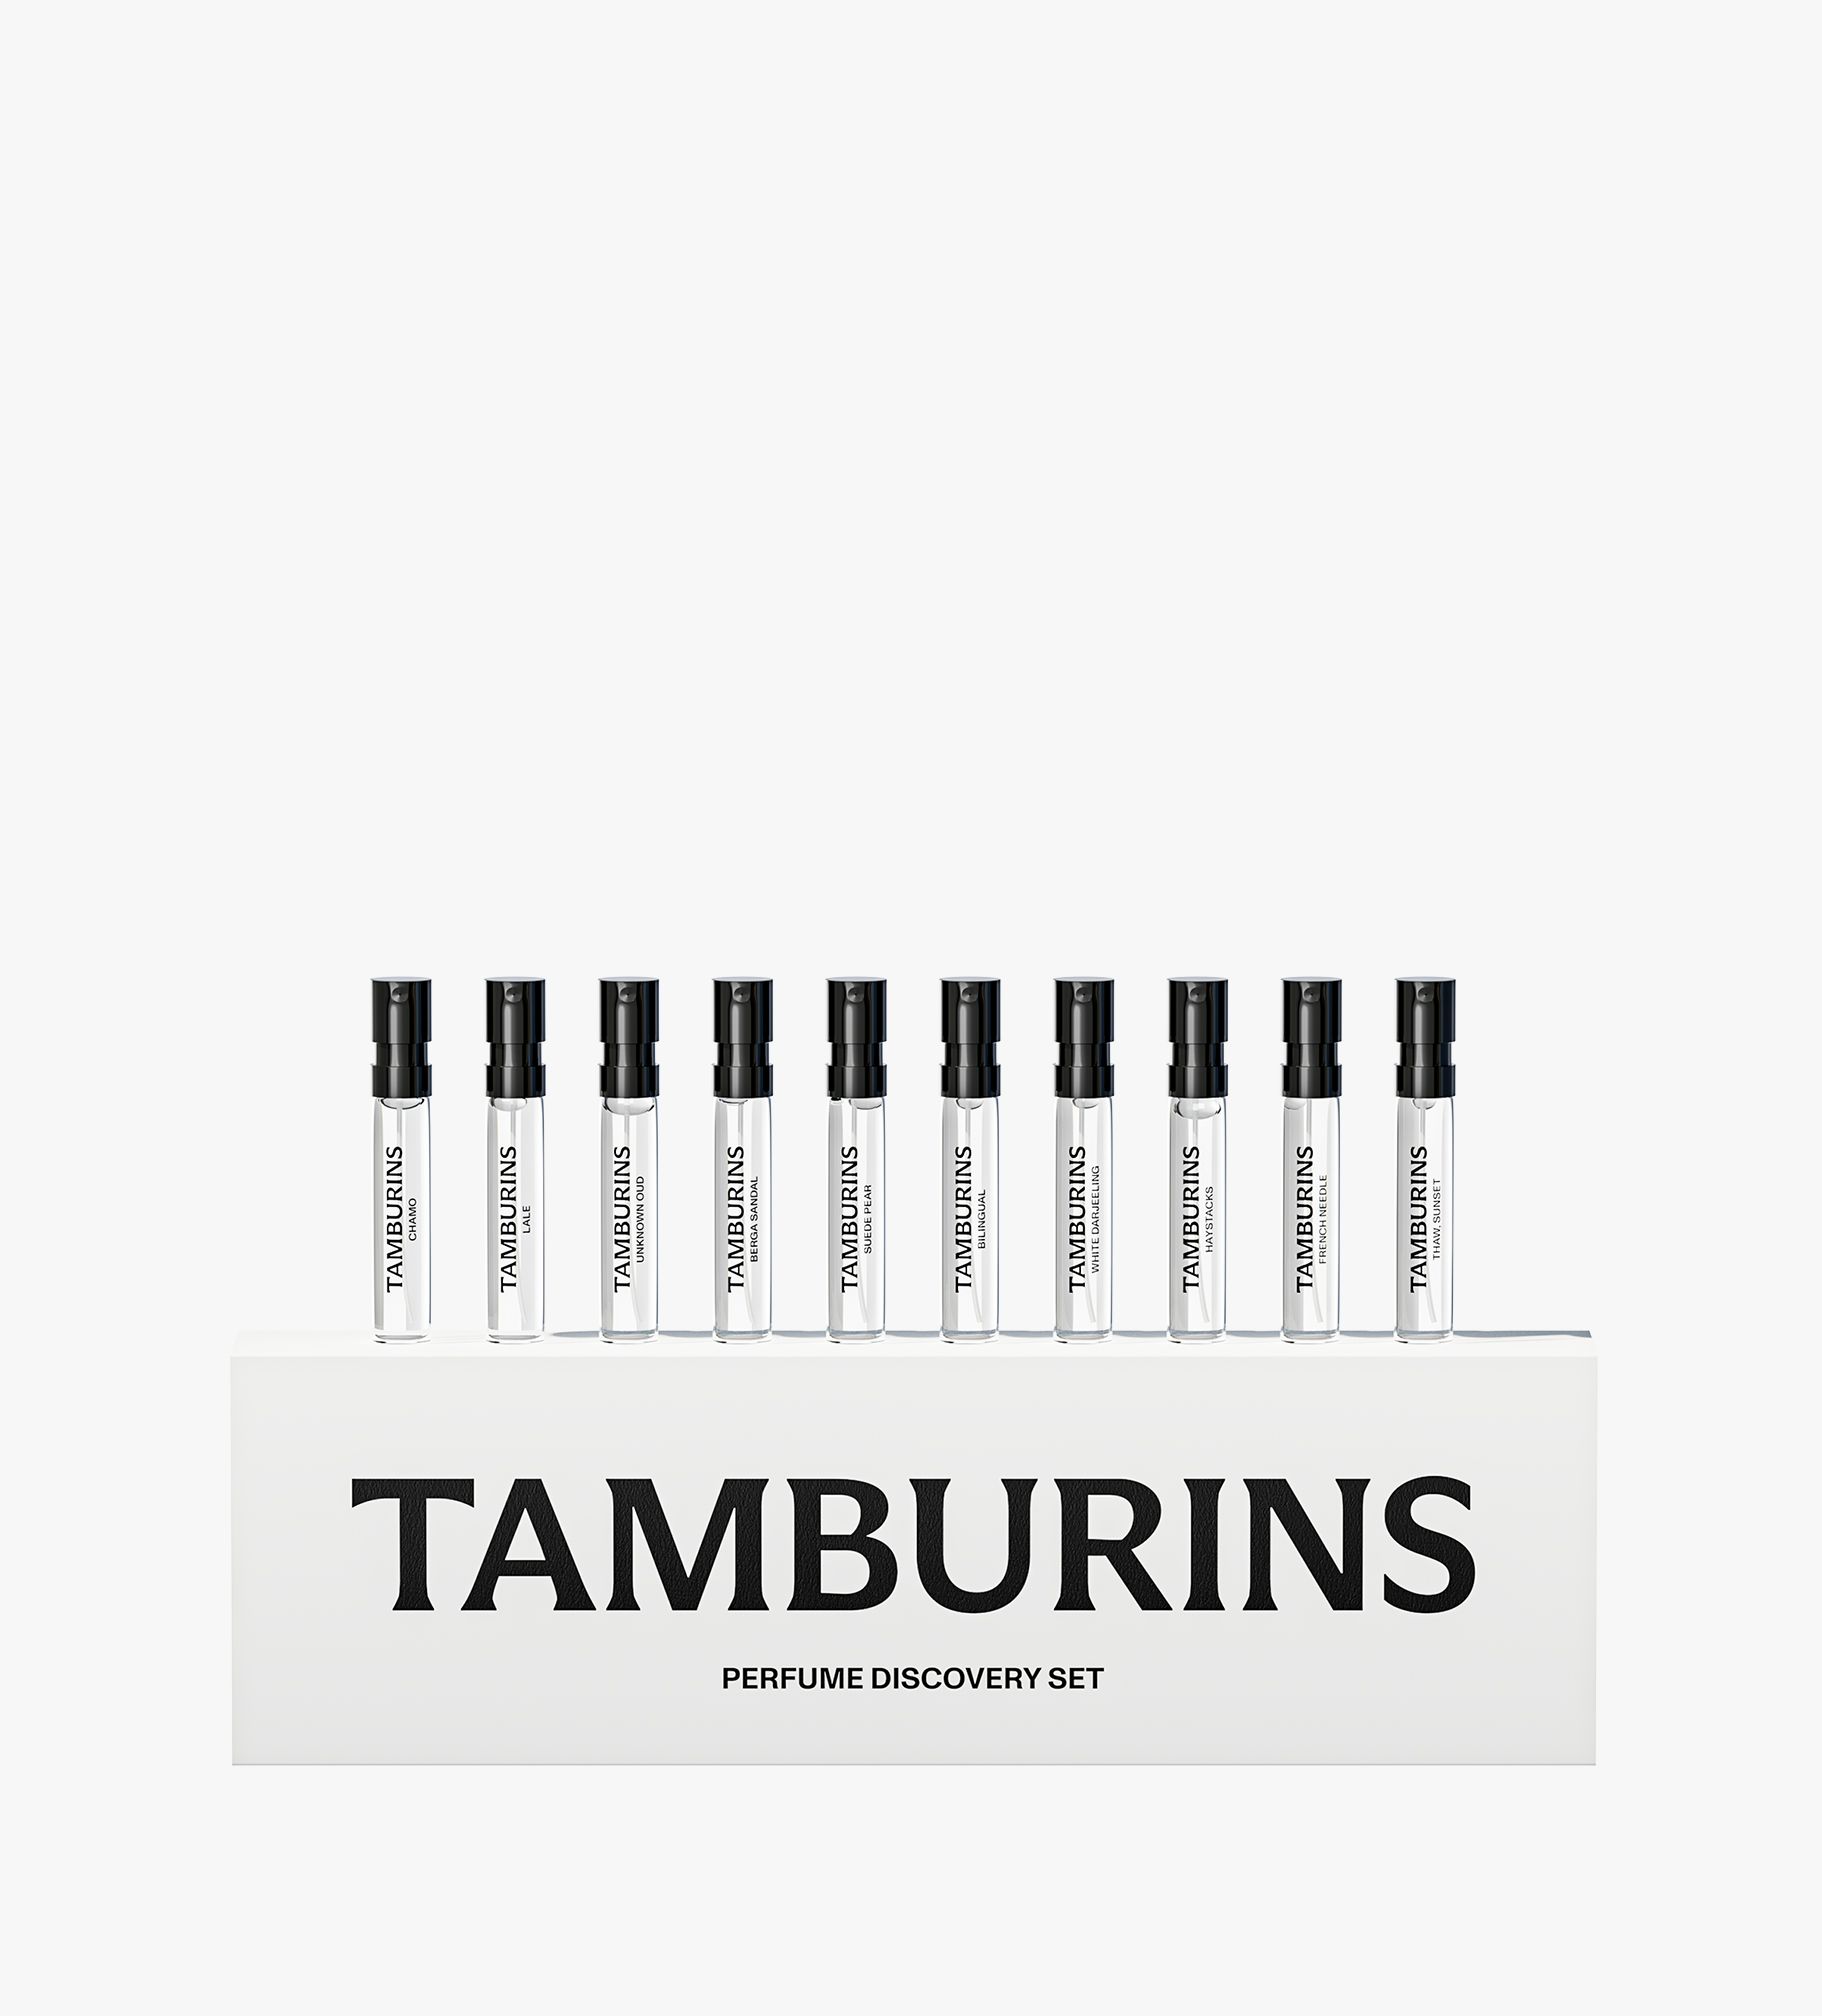 TAMBURINS Perfume Discovery Set 10items Best Price and Fast Shipping from  Beauty Box Korea